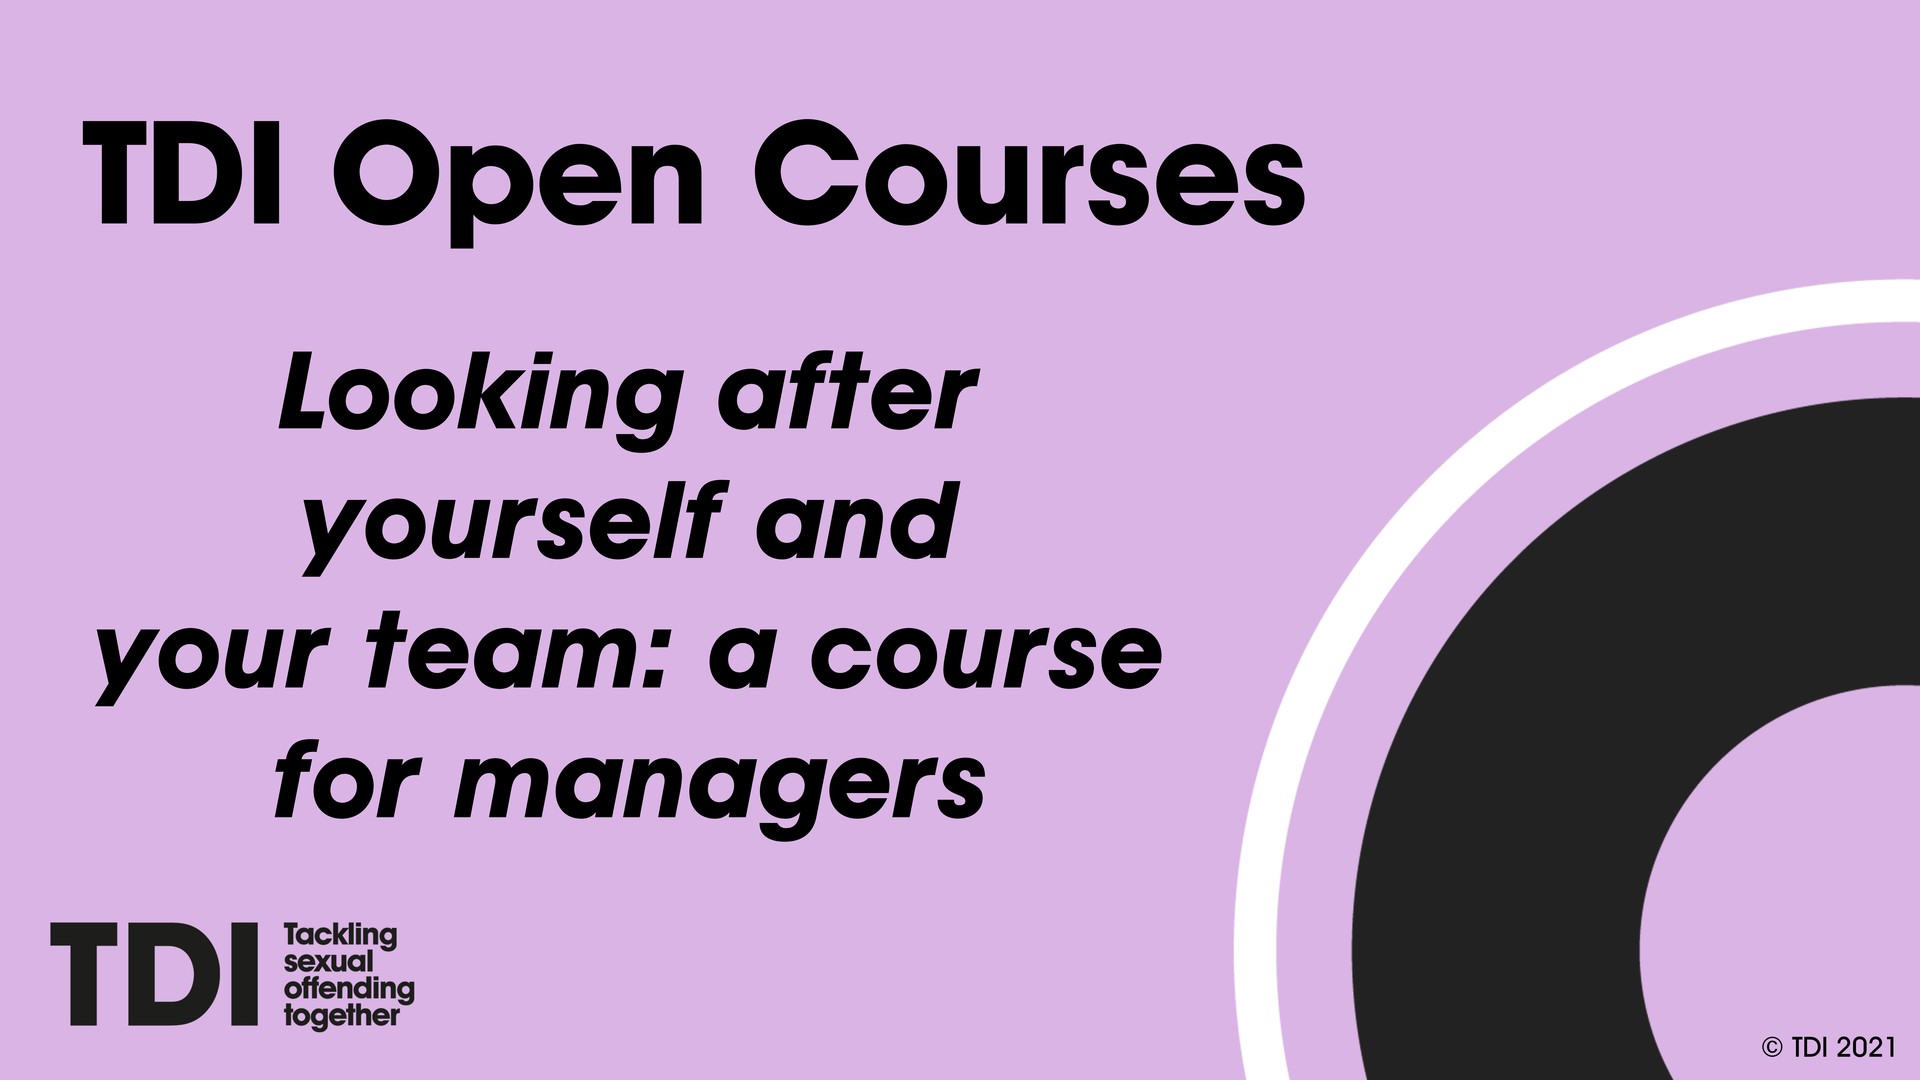 Looking after yourself and your team: A course for managers